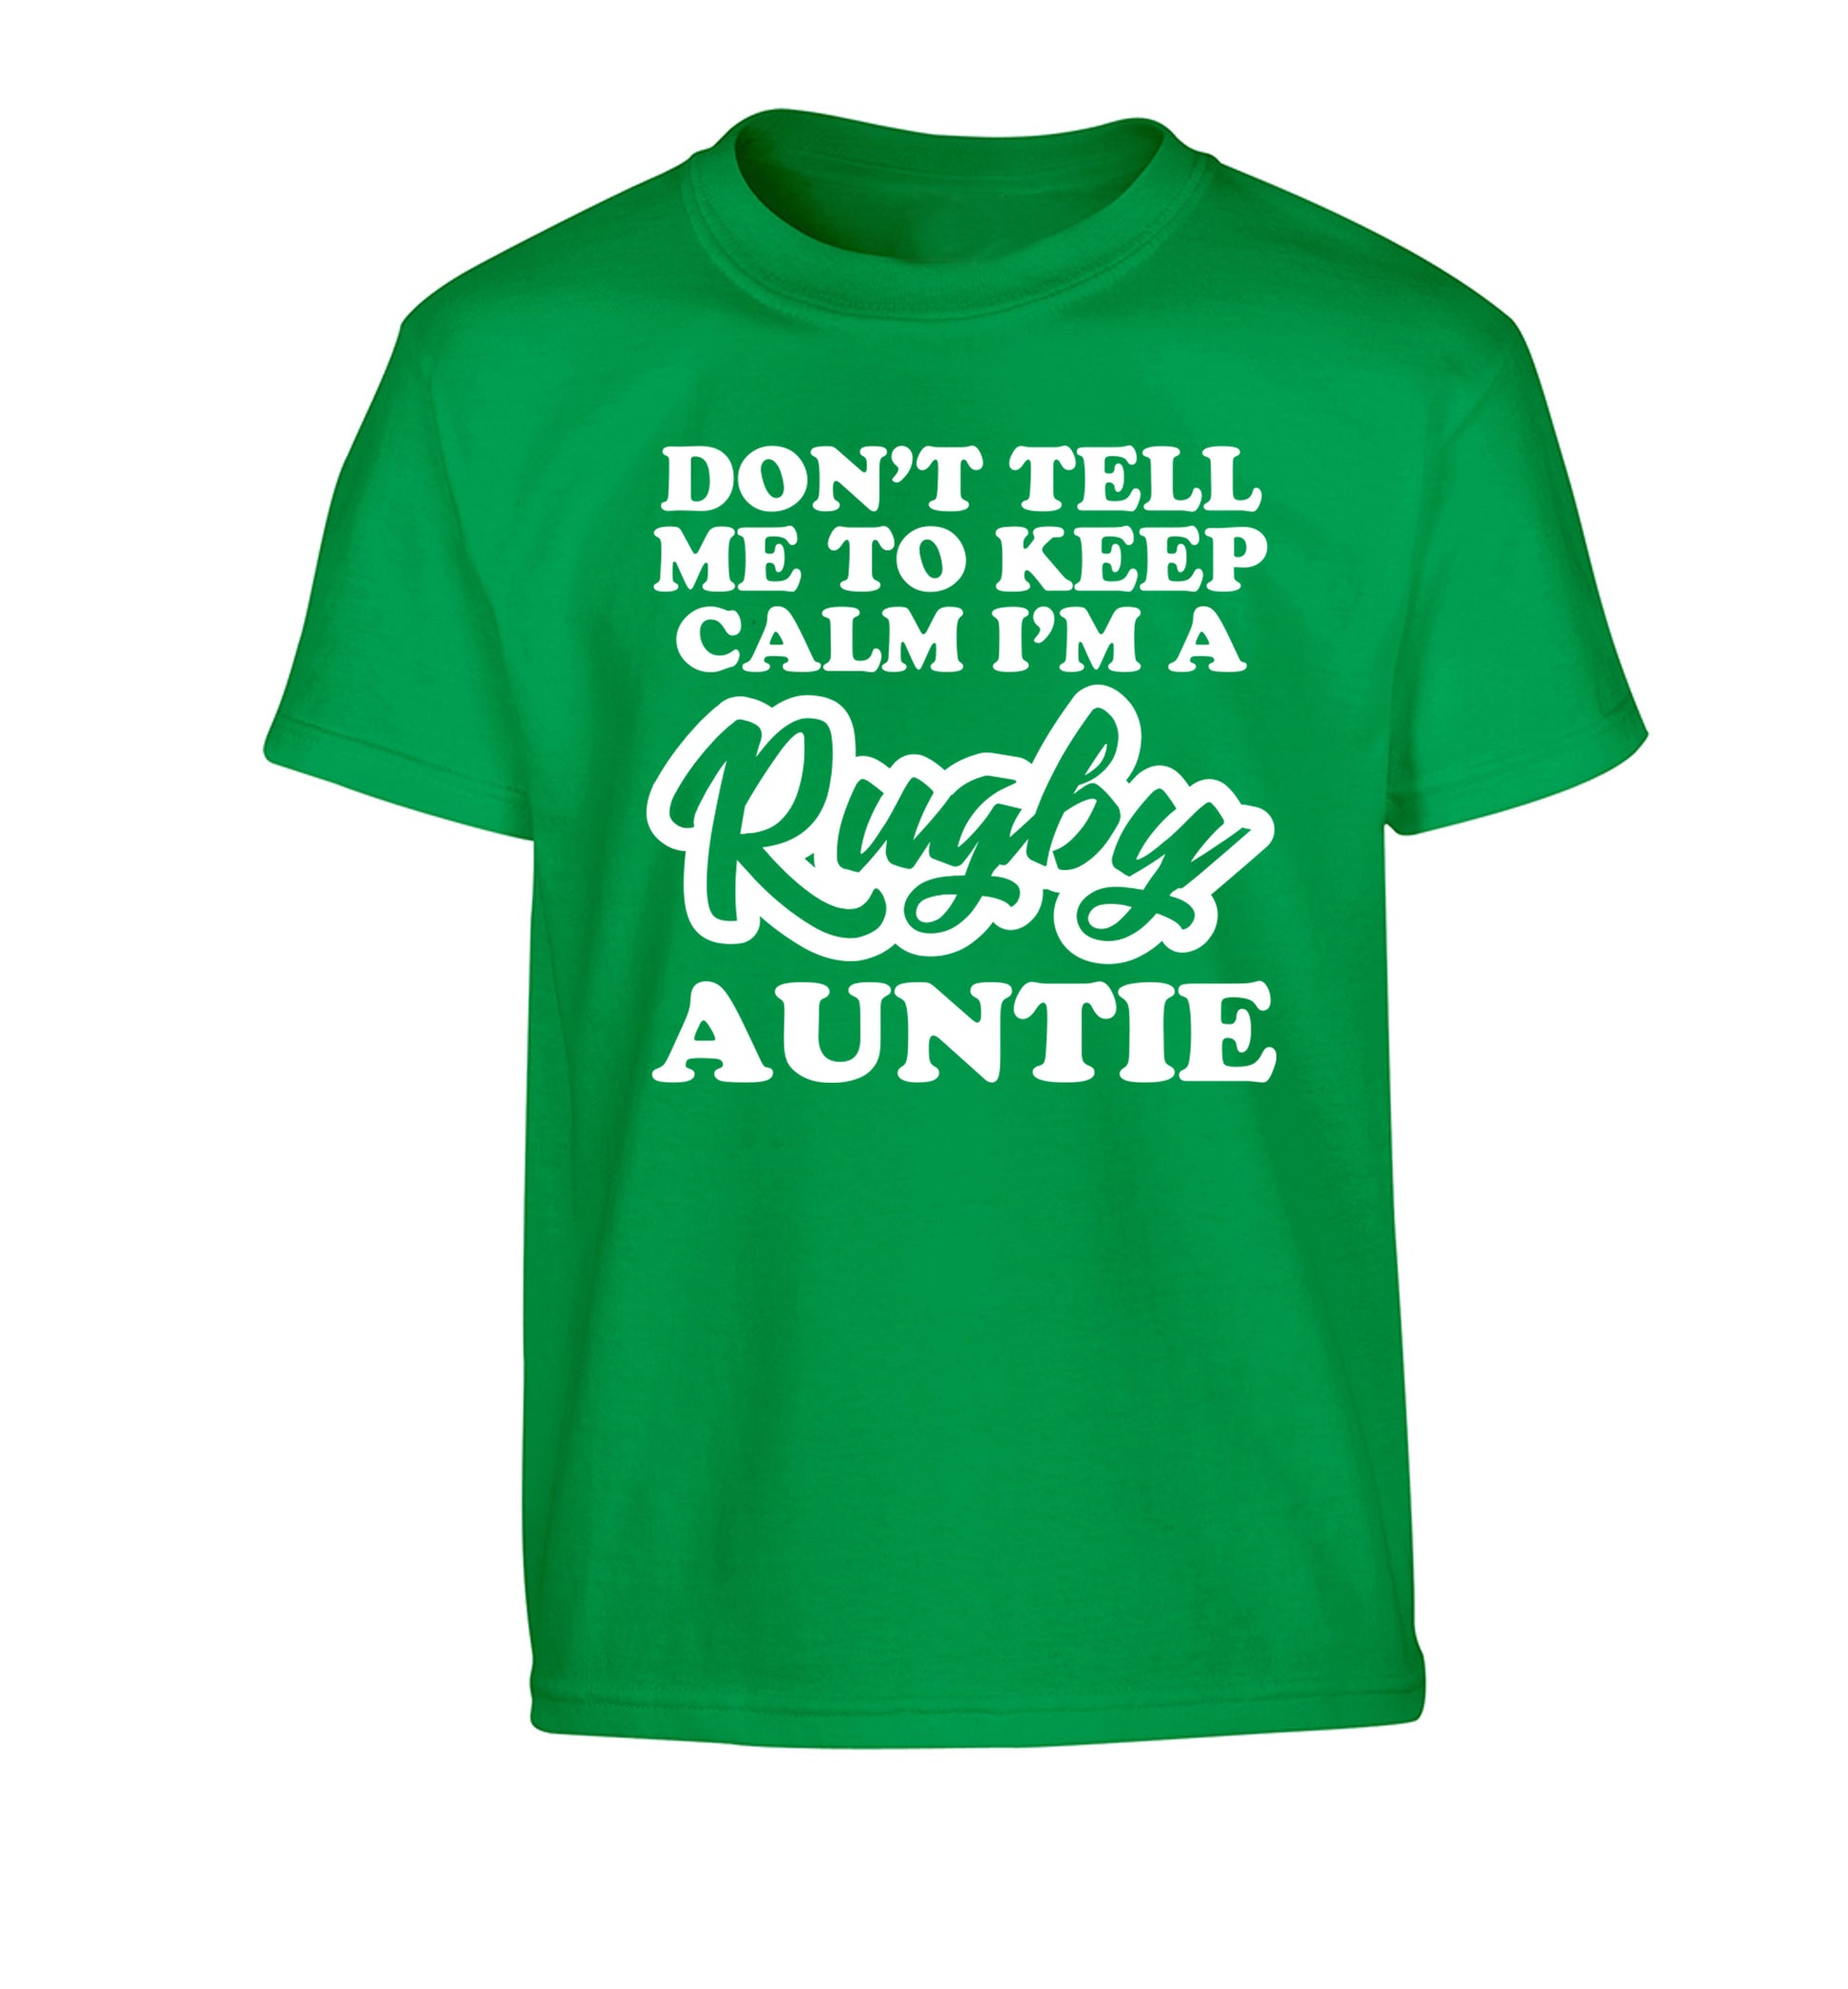 Don't tell me keep calm I'm a rugby auntie Children's green Tshirt 12-13 Years